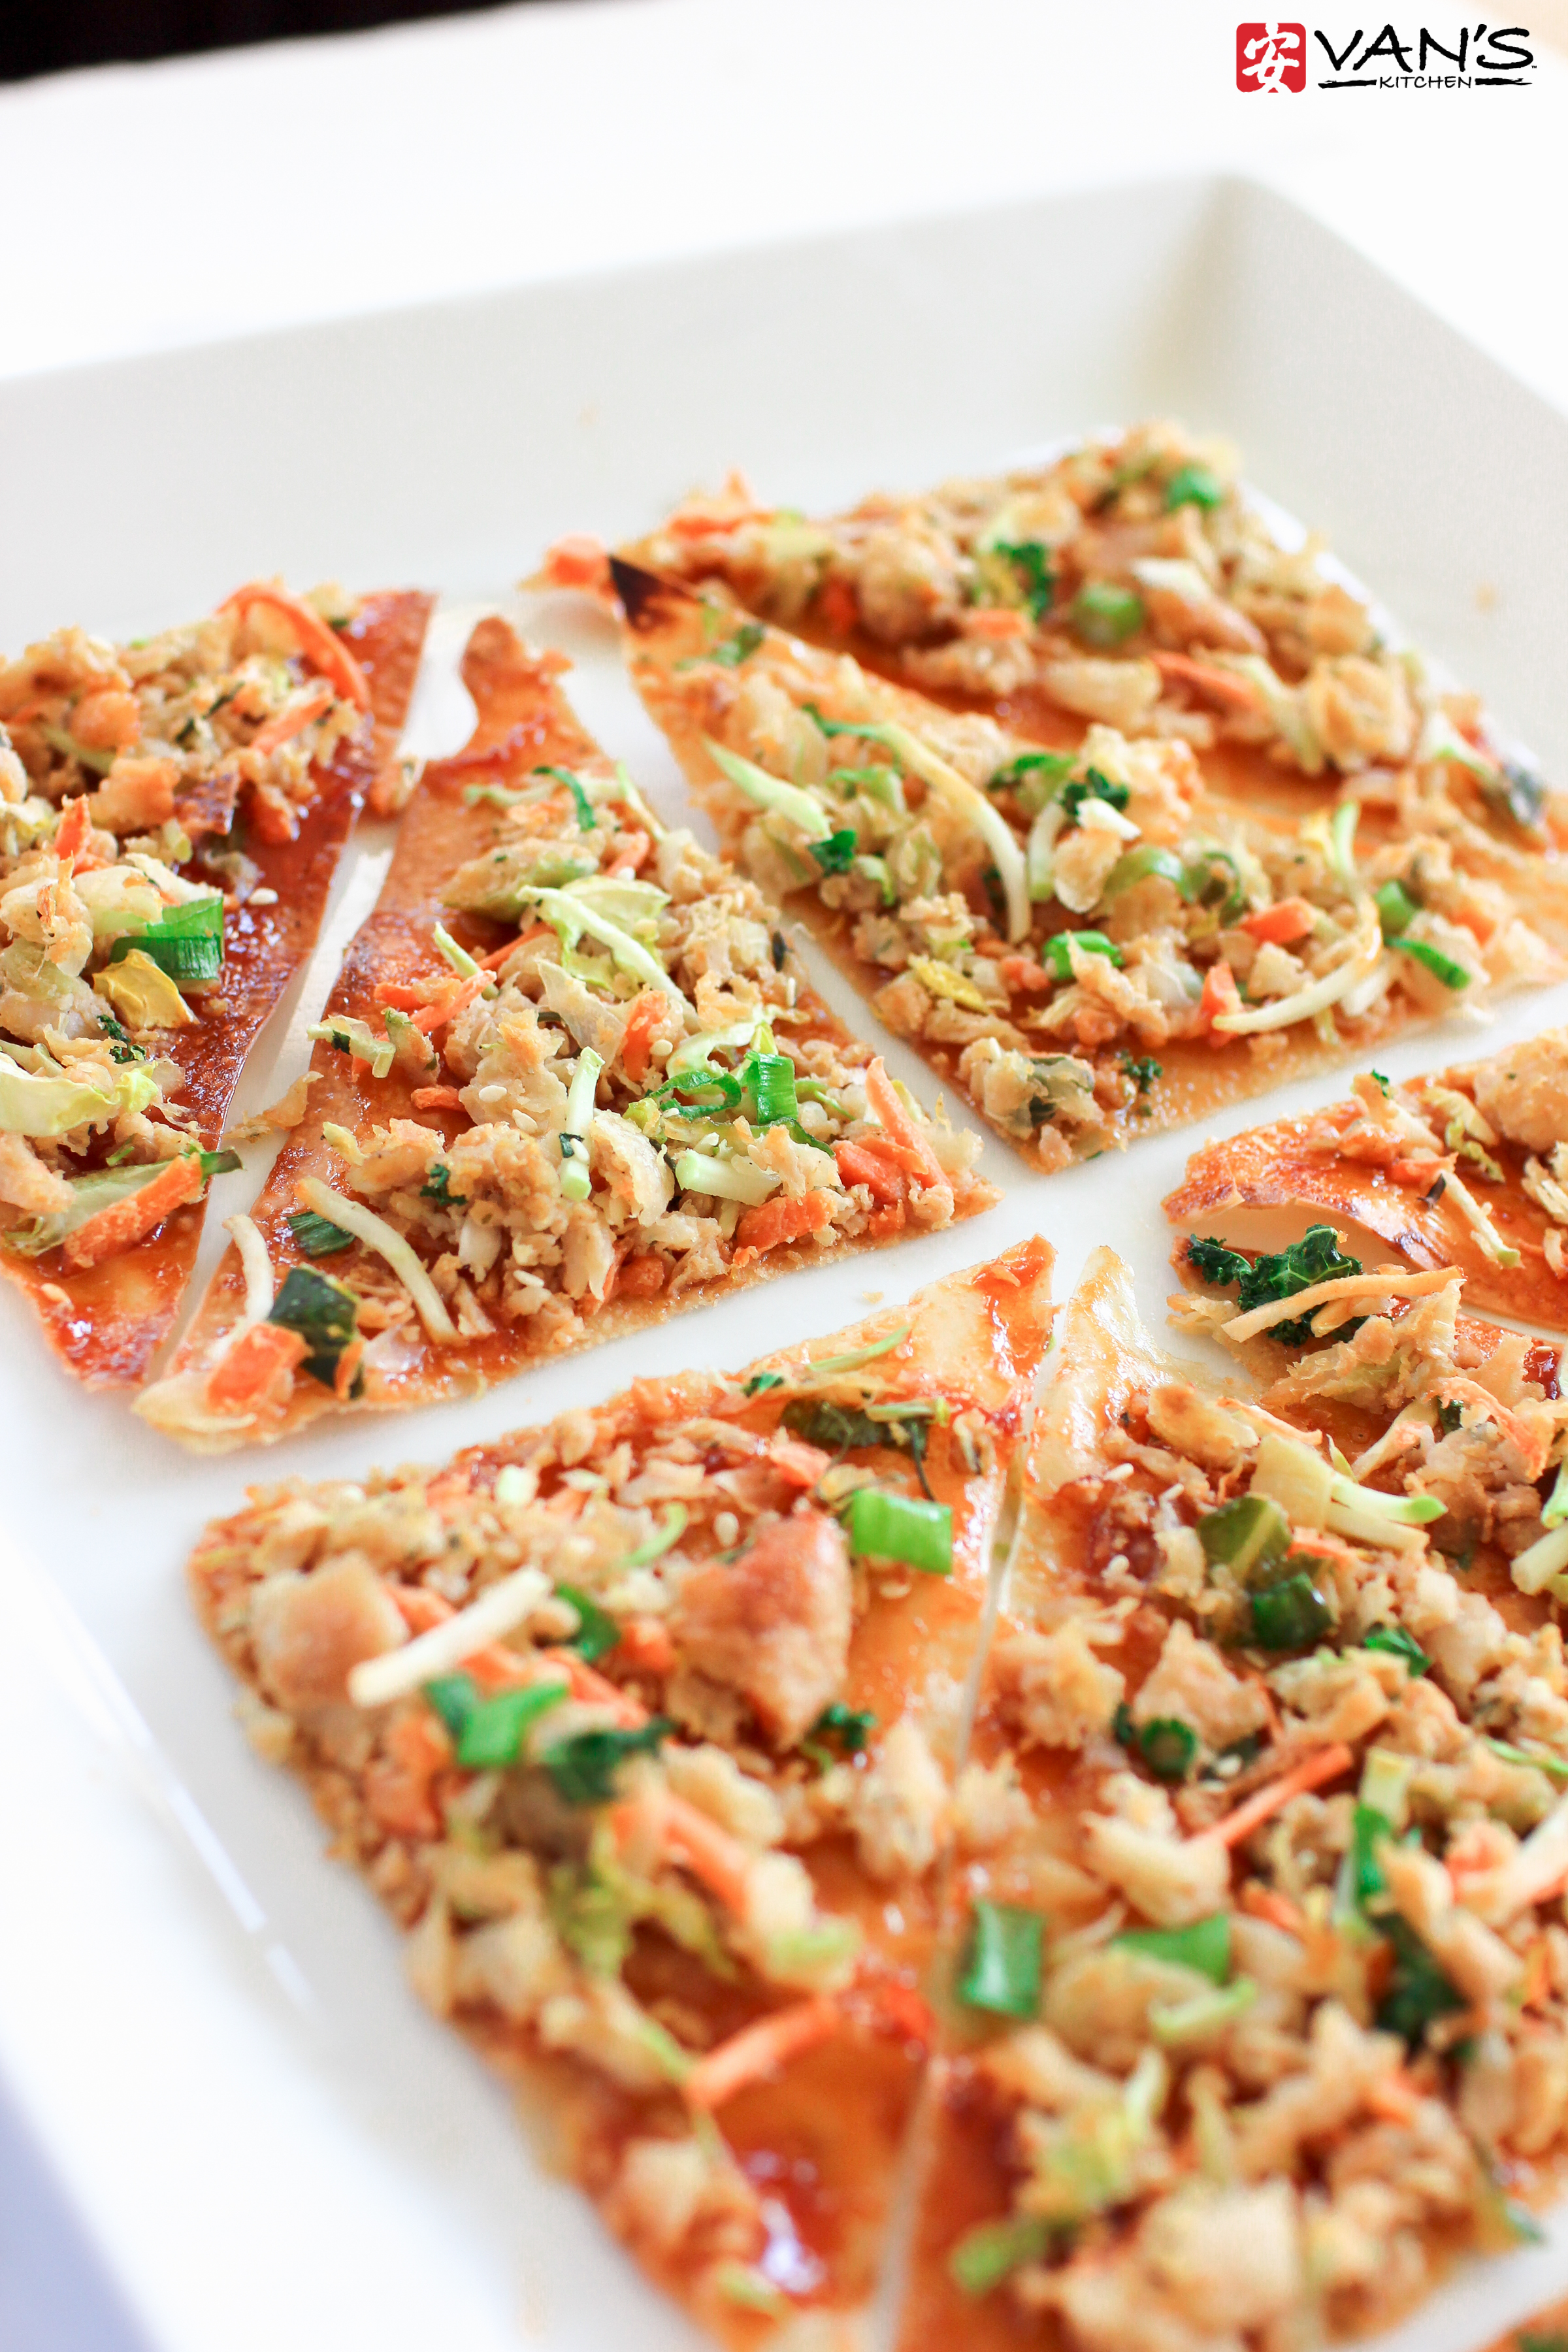 Make thin, crispy chicken egg roll pizza in only 10 minutes! It's a healthy and flavorful recipe that's perfect for weeknights or parties.